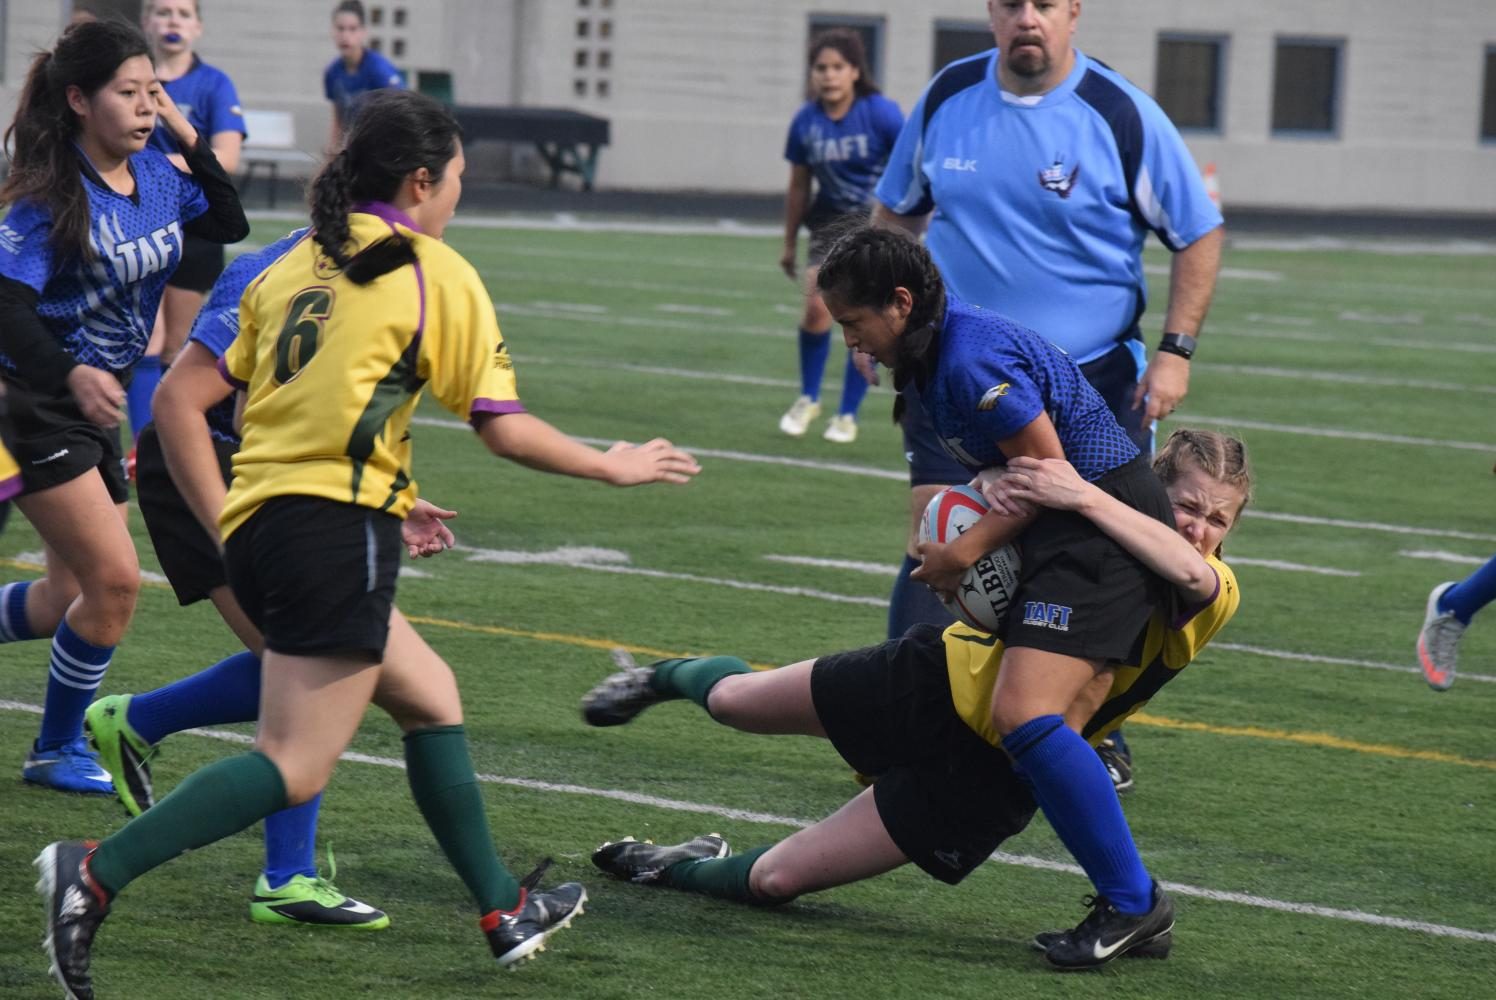 Brianna Galvin successfully tackling Taft player to stop the opposing team in their tracks. 